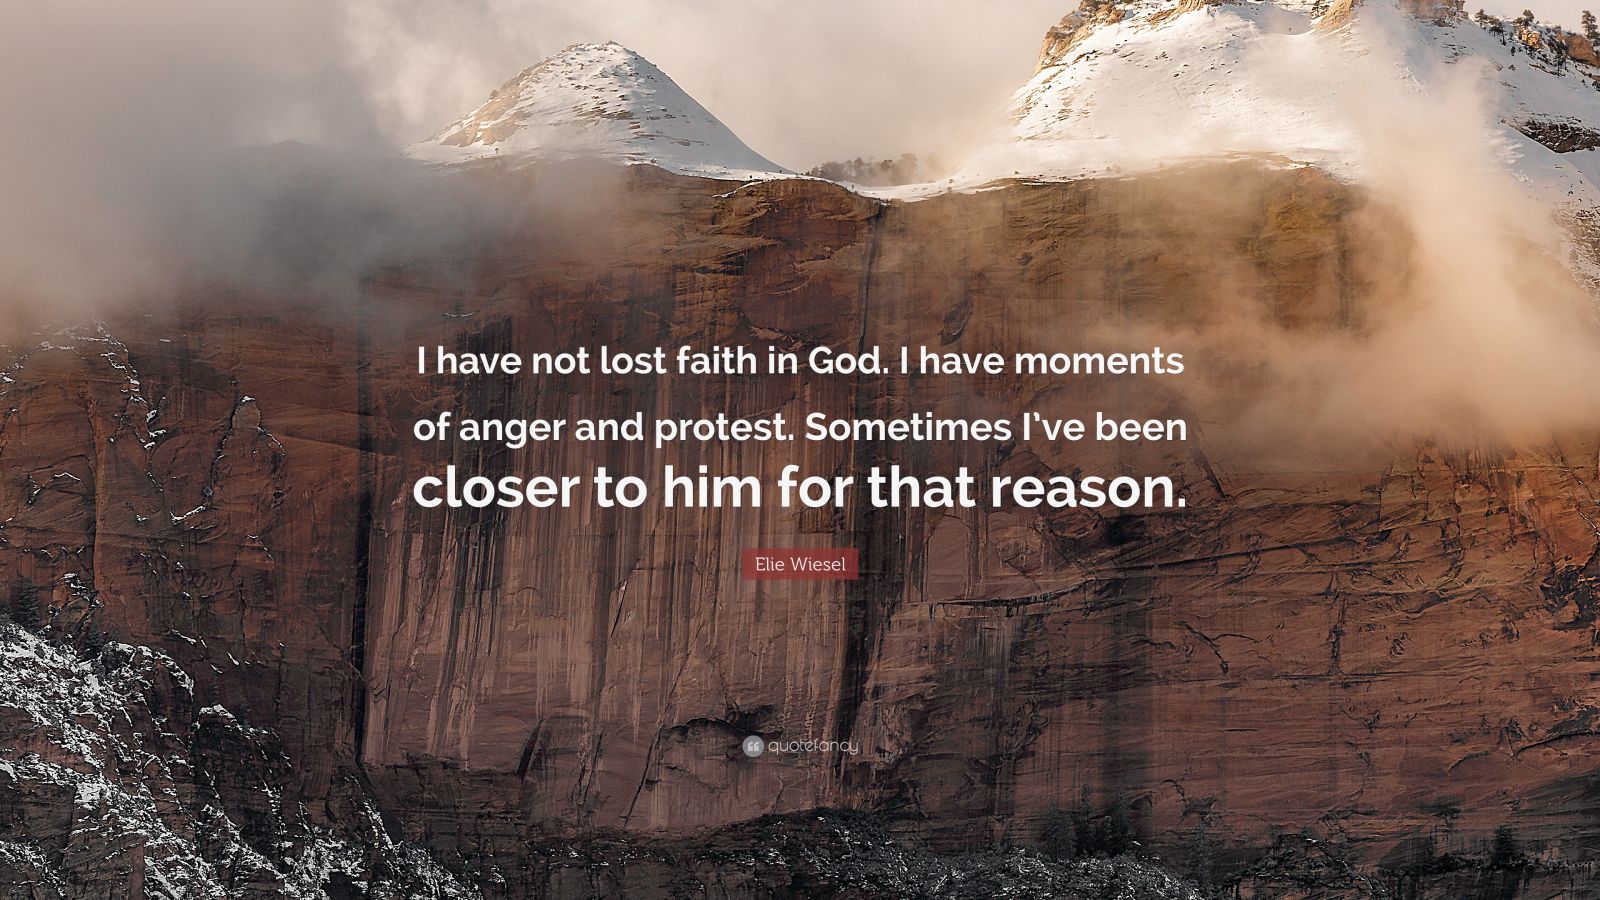 Elie Wiesel Quote: “I have not lost faith in God. I have moments of ...